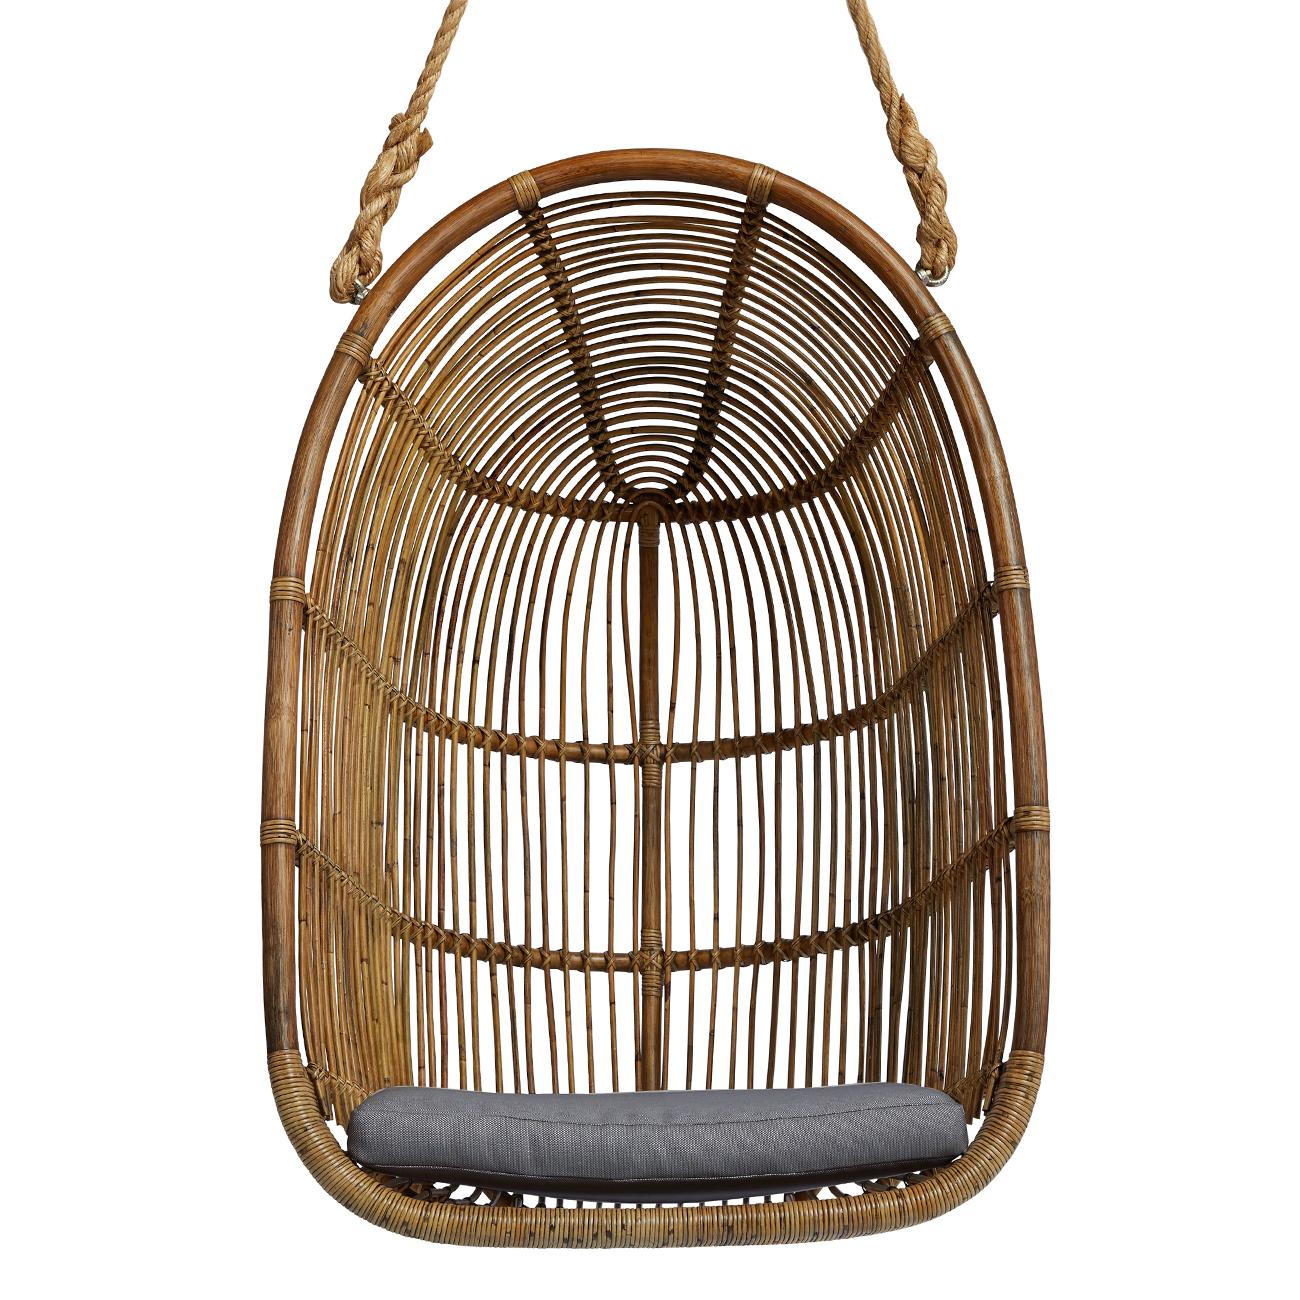 Hanging Chair Lagune all in resin fiber in rattan
style finish. Made for outdoor and indoor use.
Structure with aluminium frame. With cushion
in taupe finish included. It hangs by a rope, rope 
included.